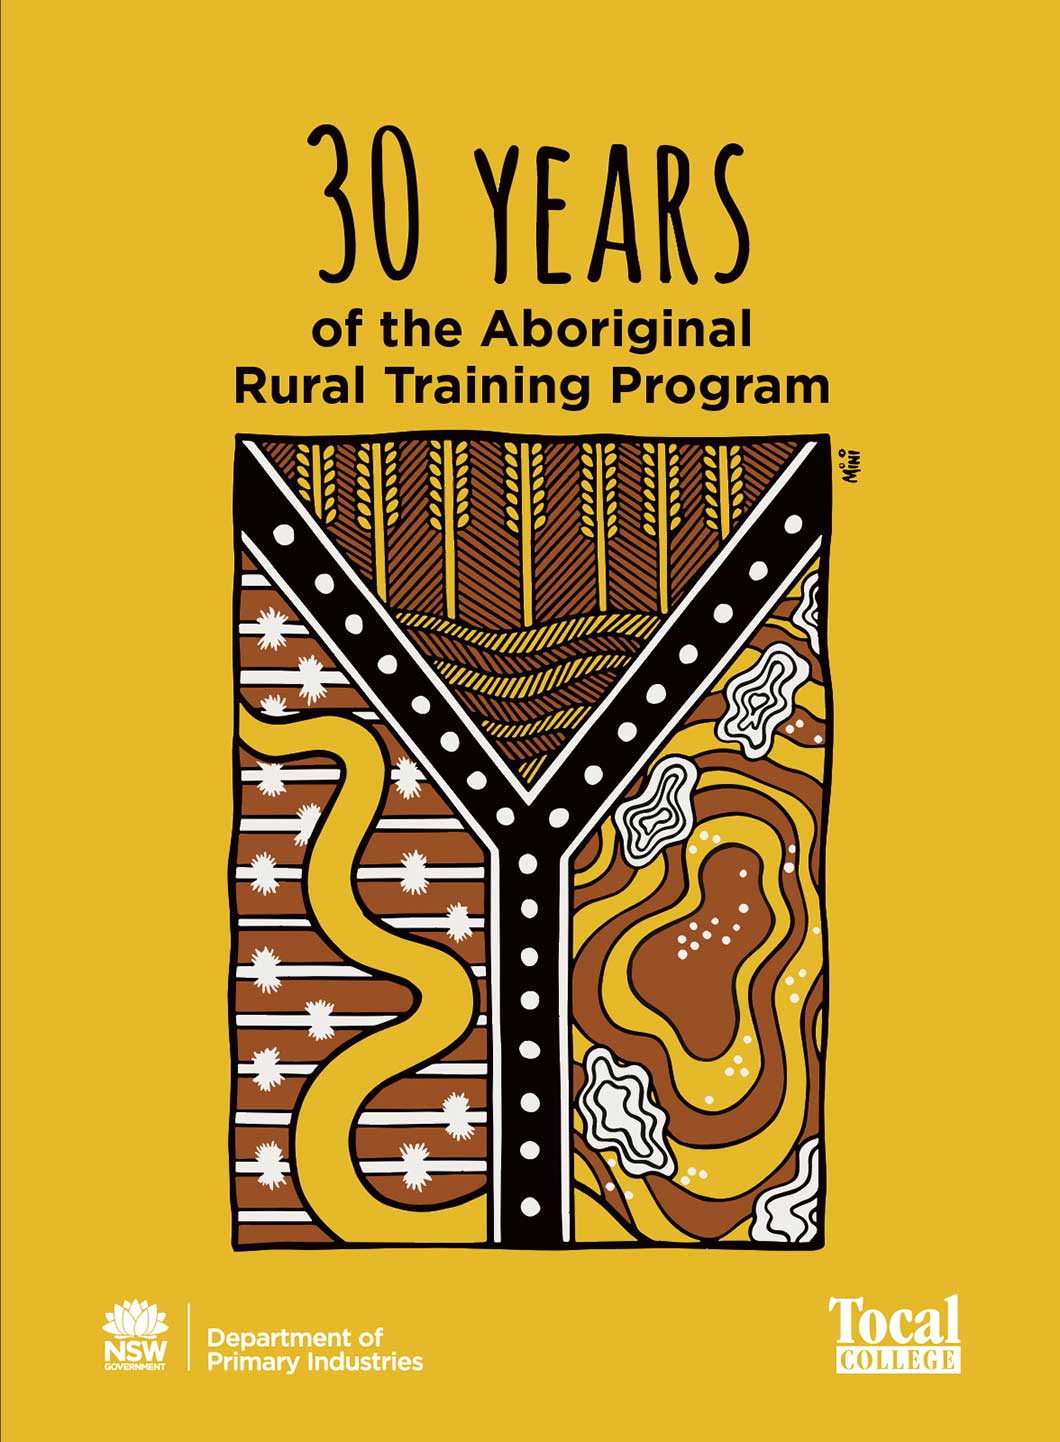 30 years of the Aboriginal Rural Training Program, book published 2019